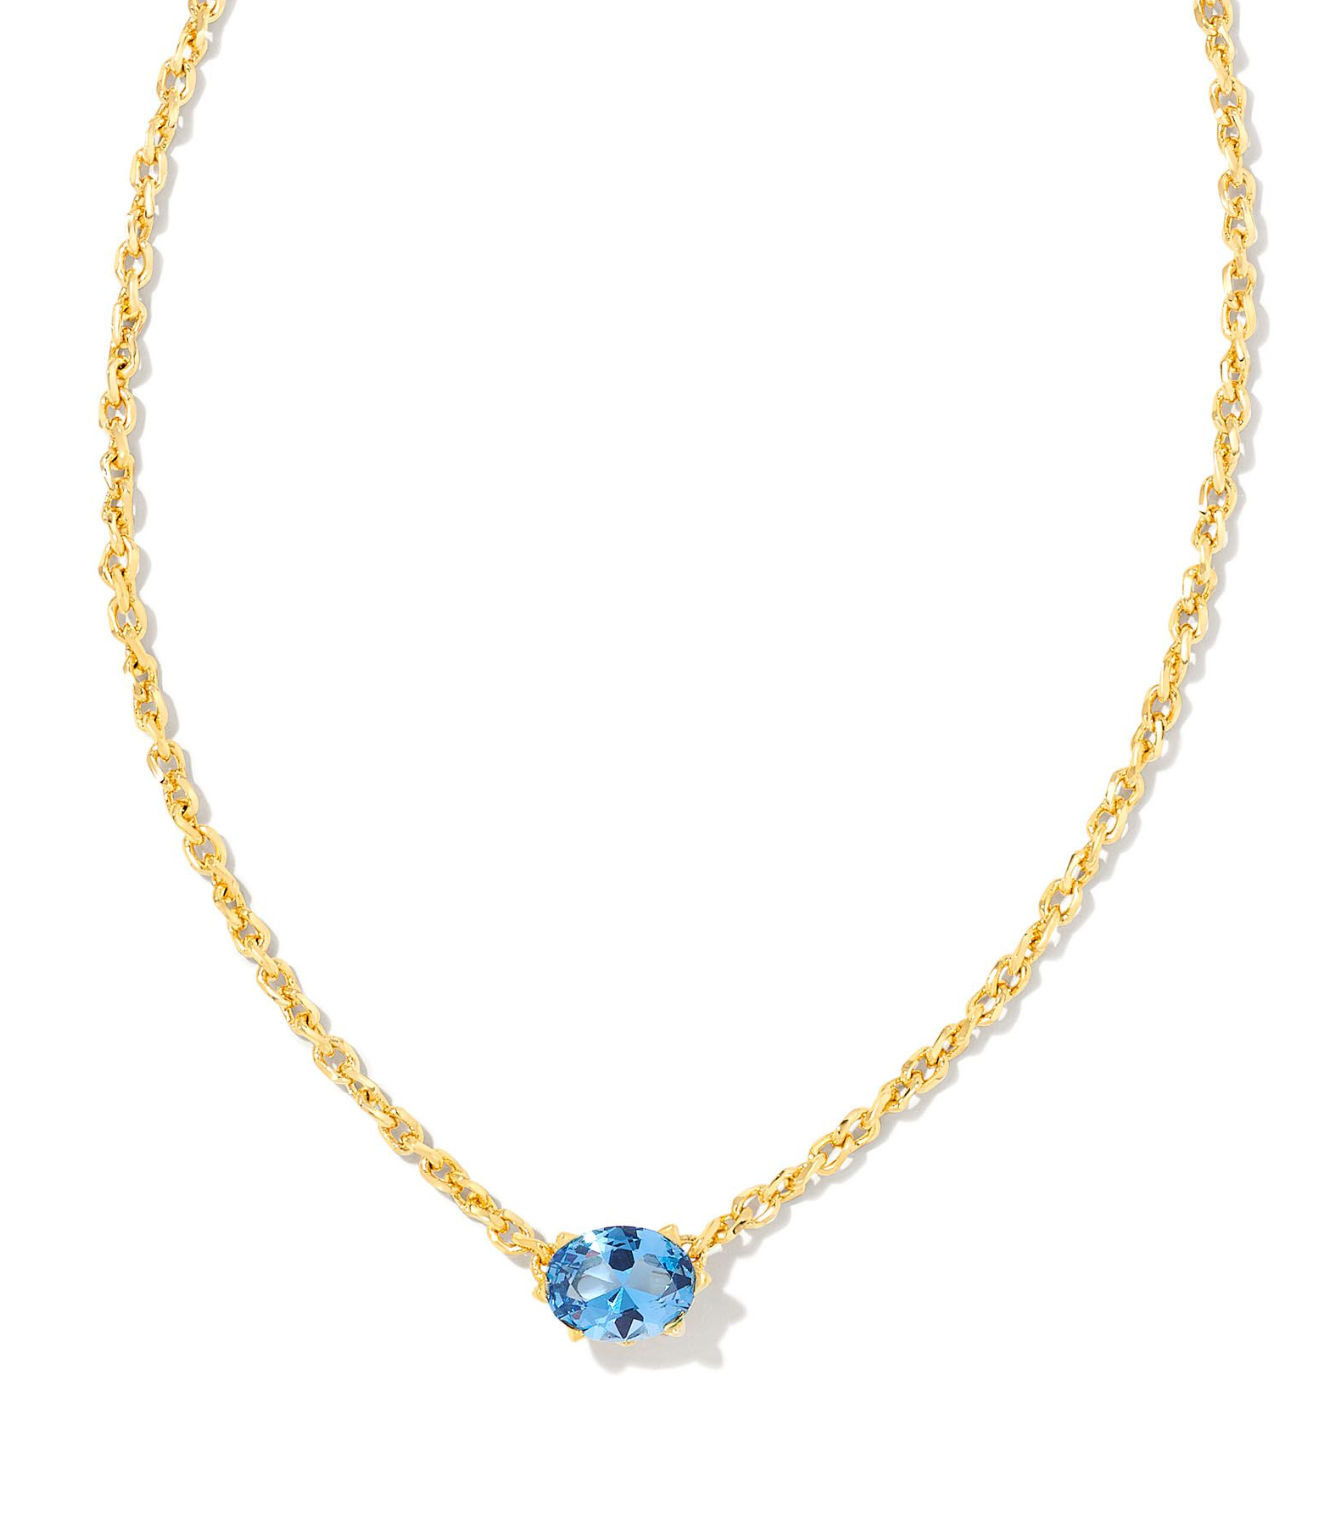 Cailin Gold Pendant Necklace in Blue Violet Crystal | KENDRA SCOTT - The Street Boutique 